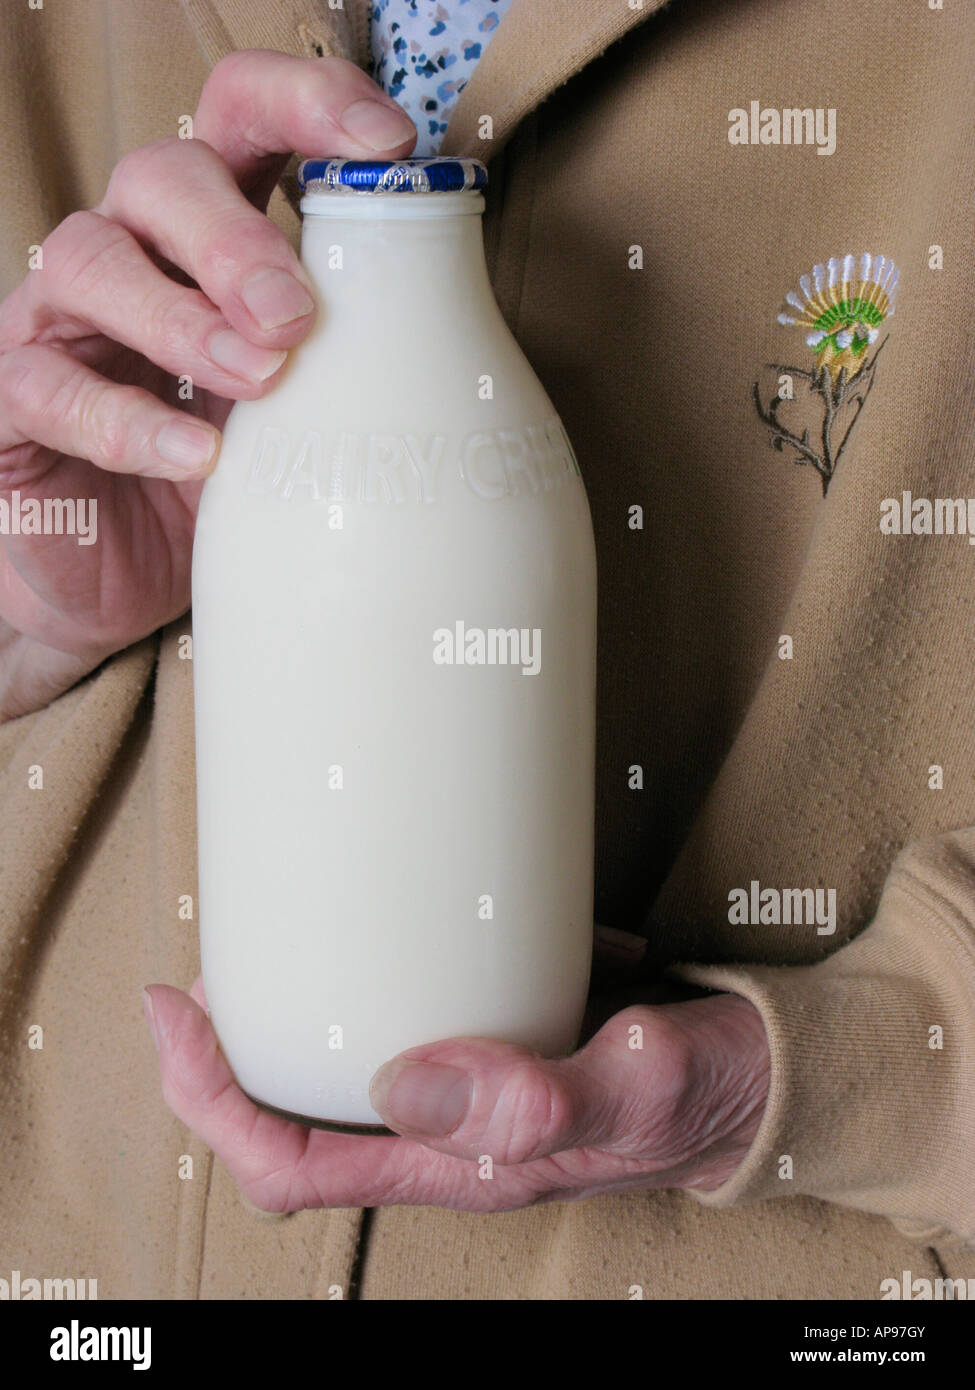 elderly woman holding a bottle of Dairy Crest milk, a drink important for the post menopausal woman Stock Photo